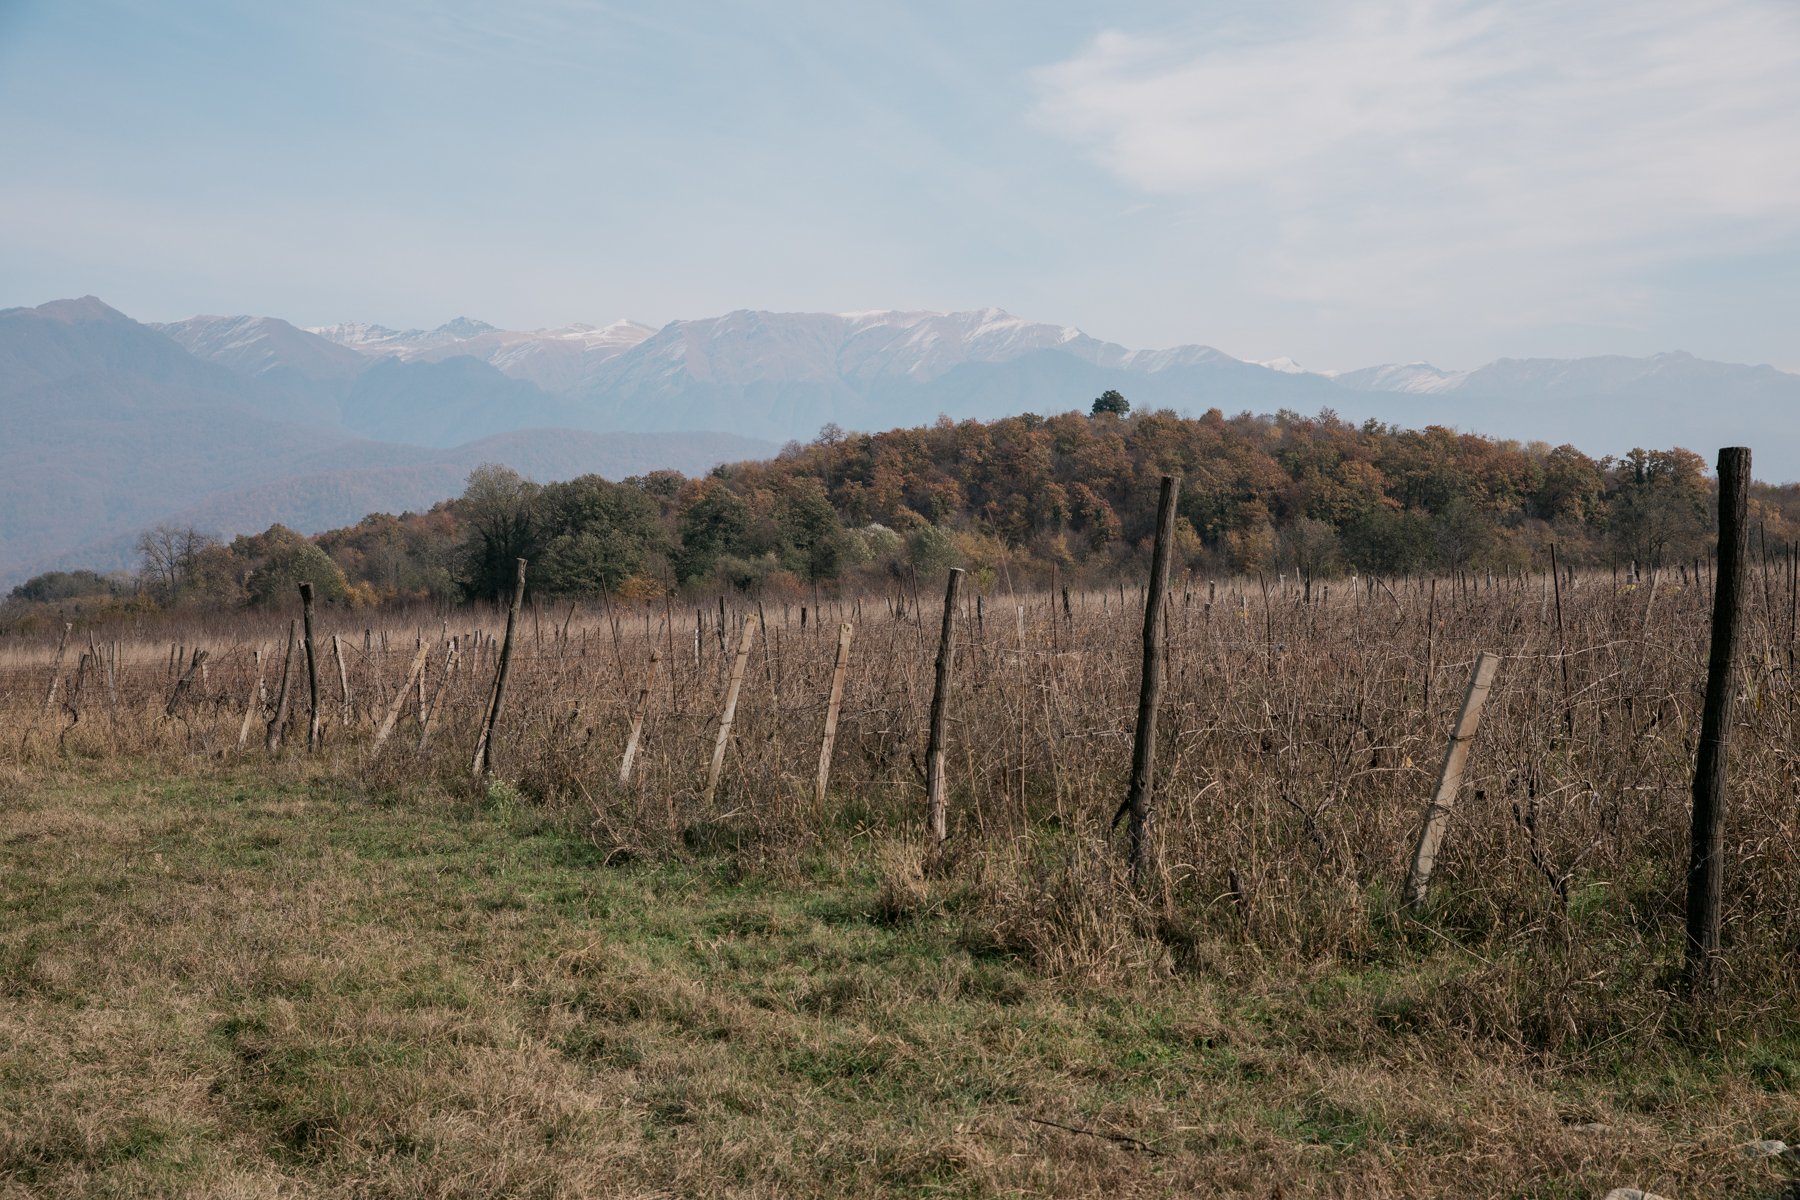  A vineyard near Gelati. The earliest known evidence of winemaking was found in the Alazani Valley and it has long been the region's main industry. 